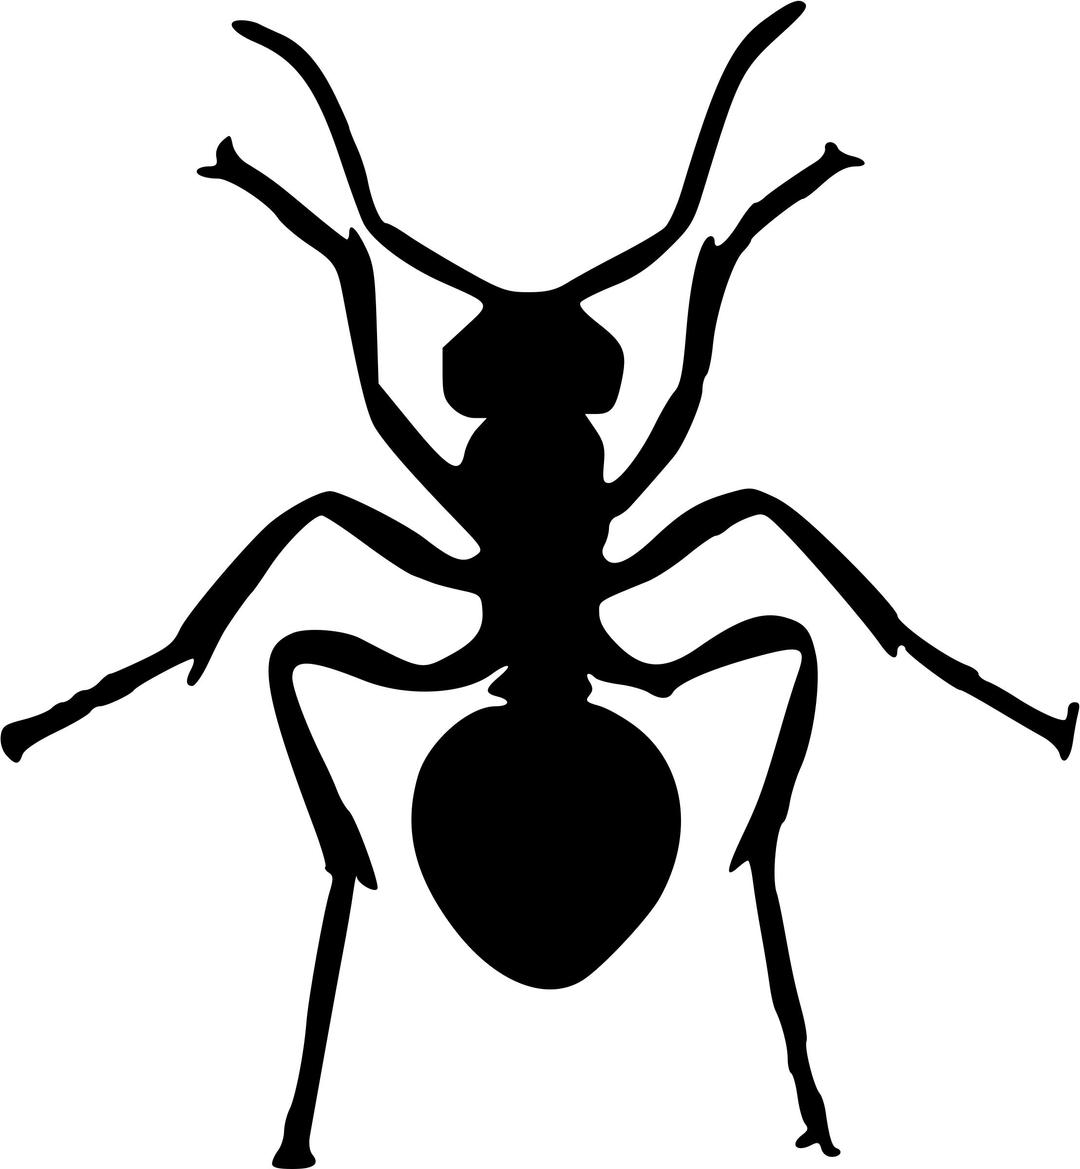 Ant silhouette png transparent